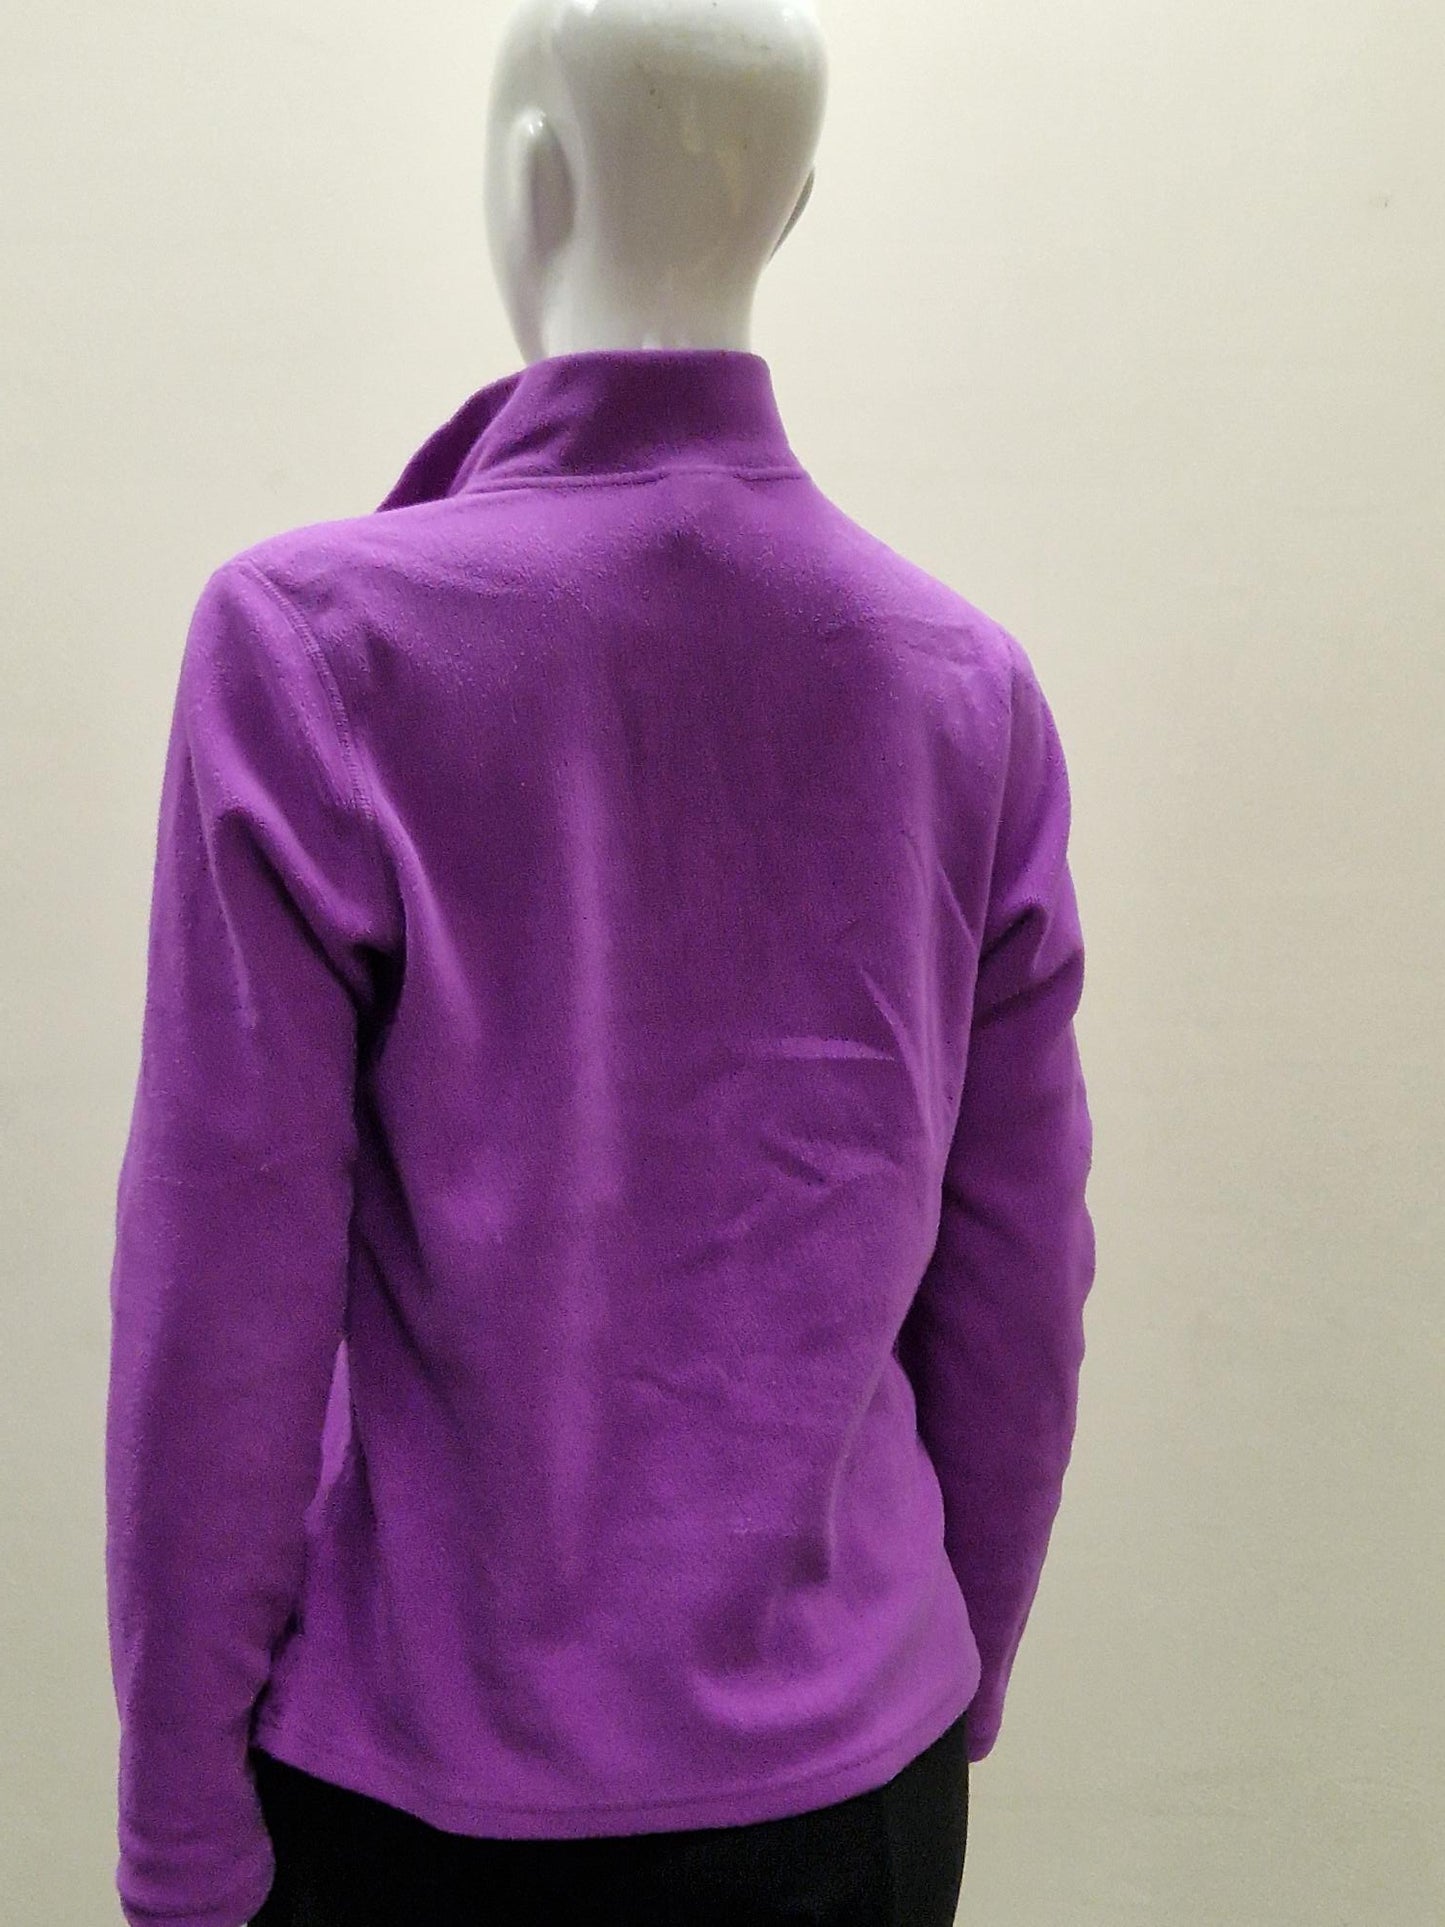 North Face Ladies fleece in Purple - Size Large